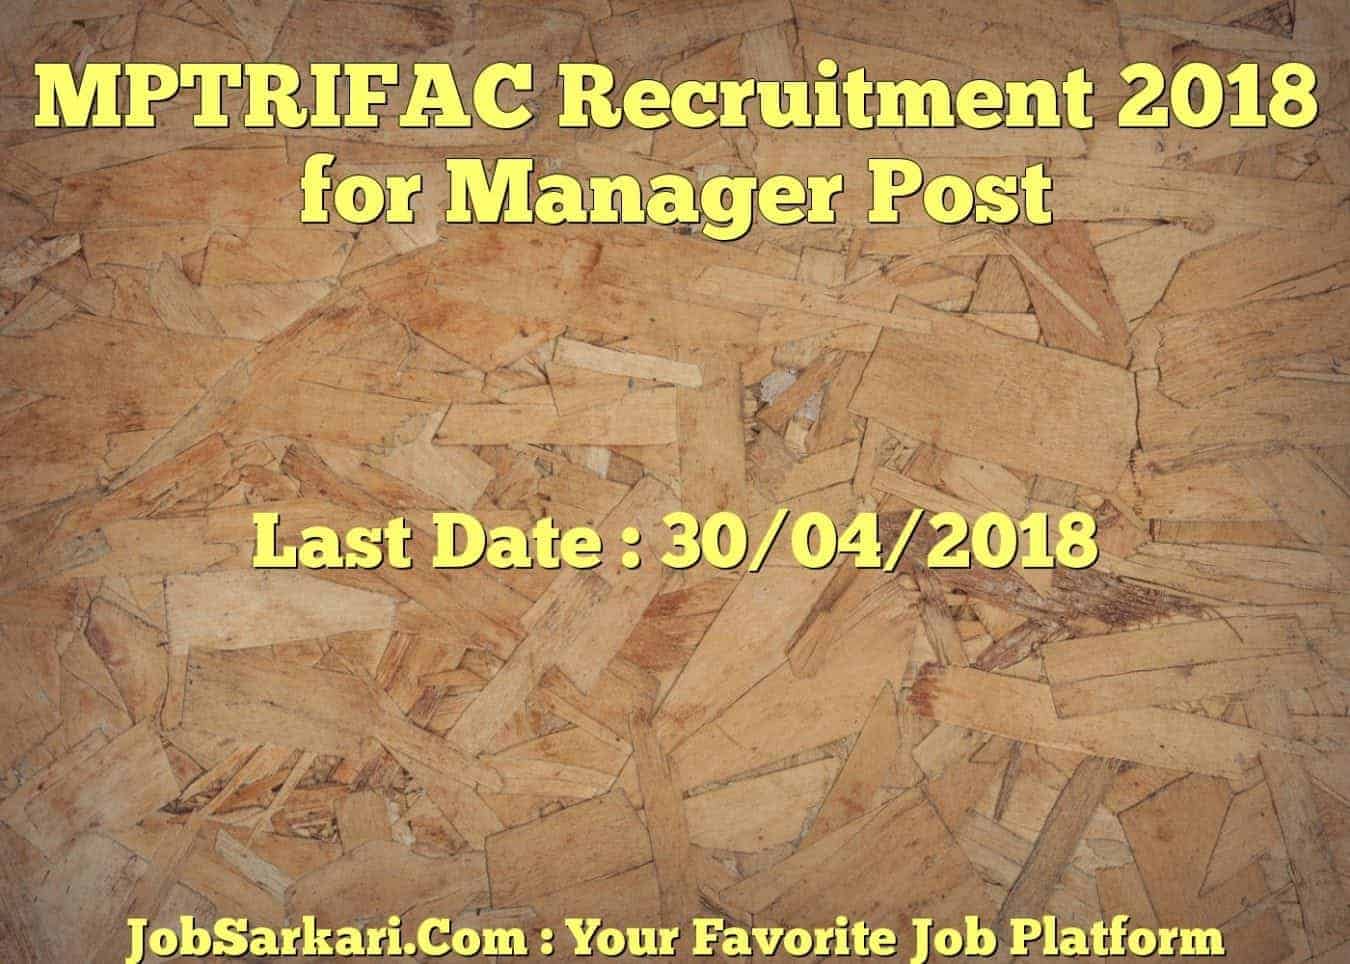 MPTRIFAC Recruitment 2018 for Manager Post